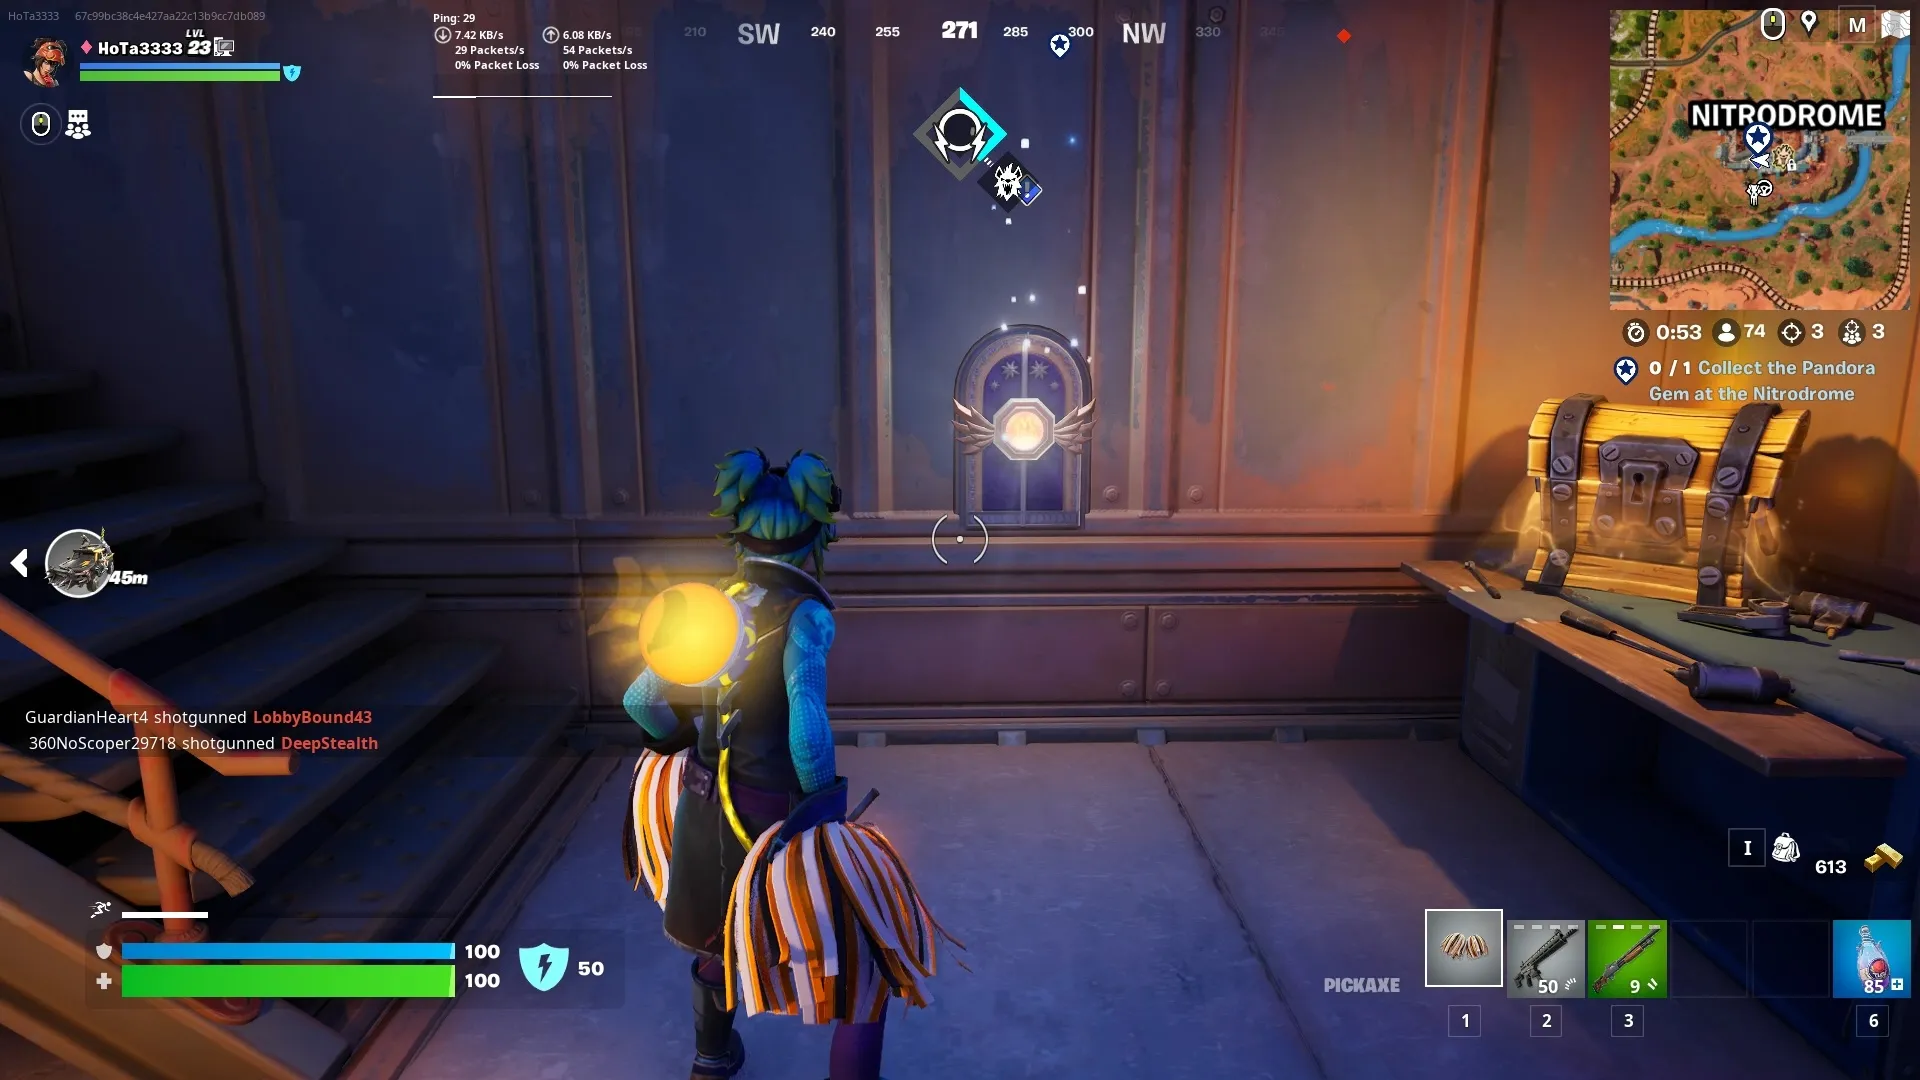 How to Collect the Pandora Gem at the Nitrodrome in Fortnite